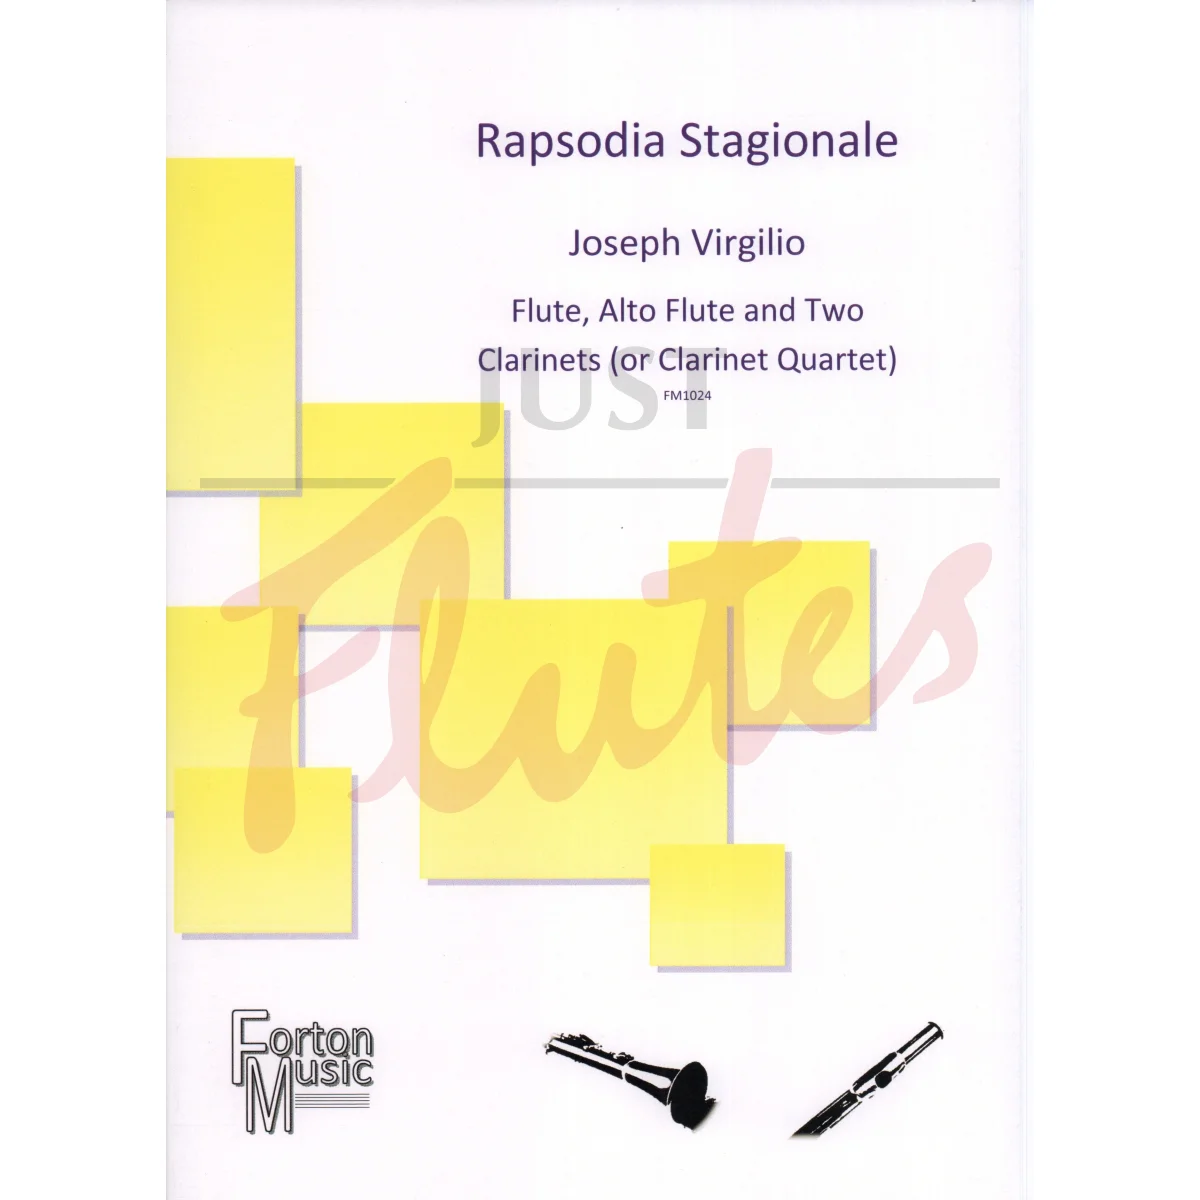 Rhapsodia Stagionale for Flute, Alto Flute and Two Clarinets (or Clarinet Quartet)